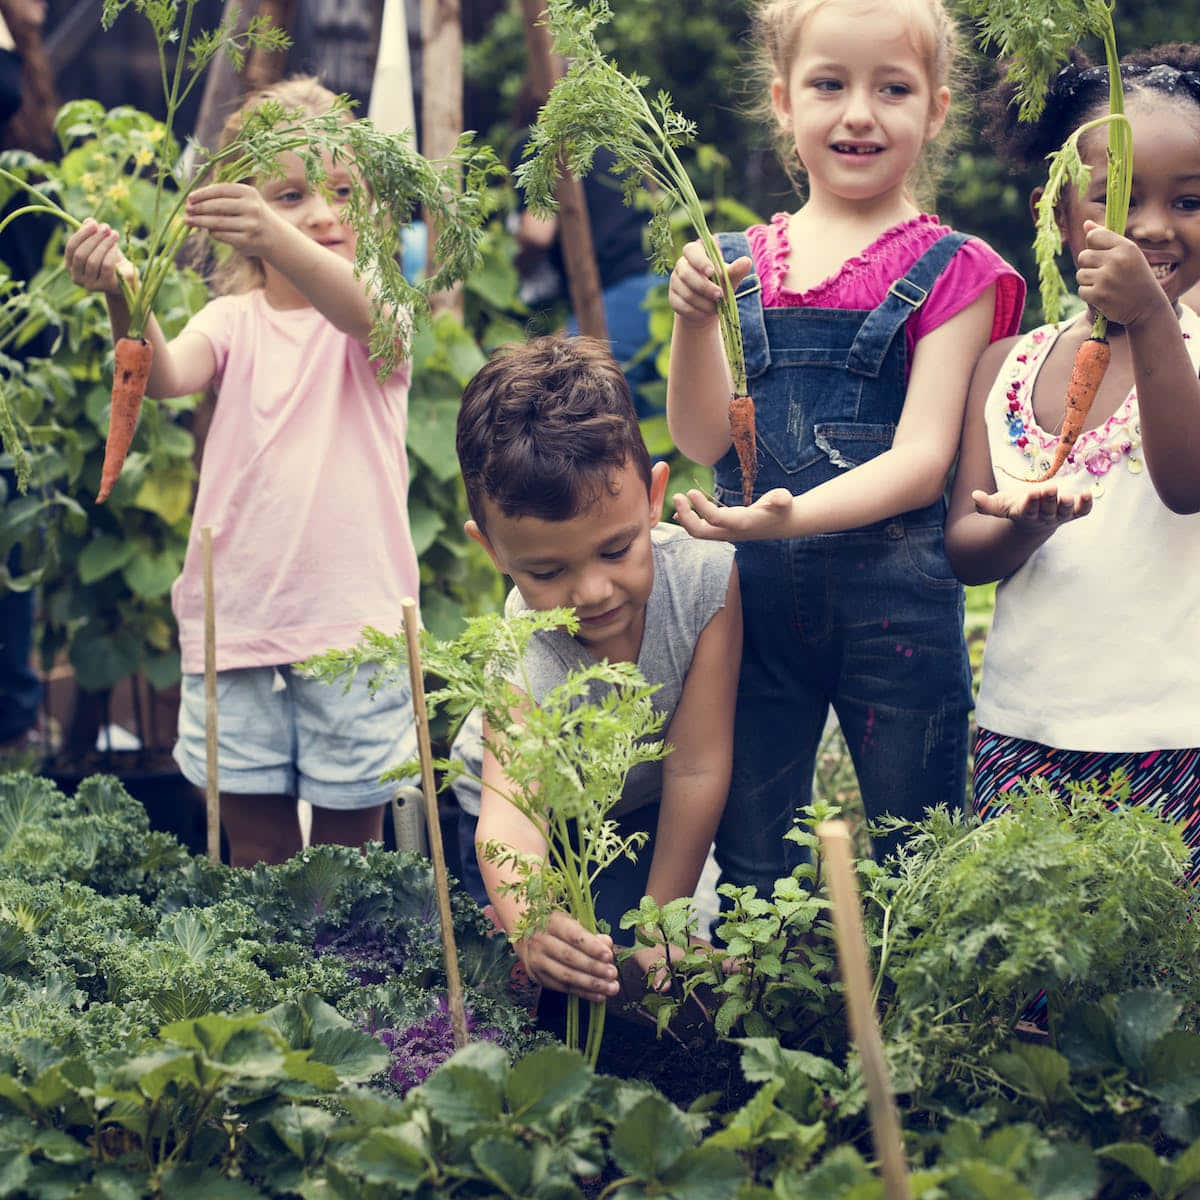 A Group Of Children Are Planting Vegetables In A Garden